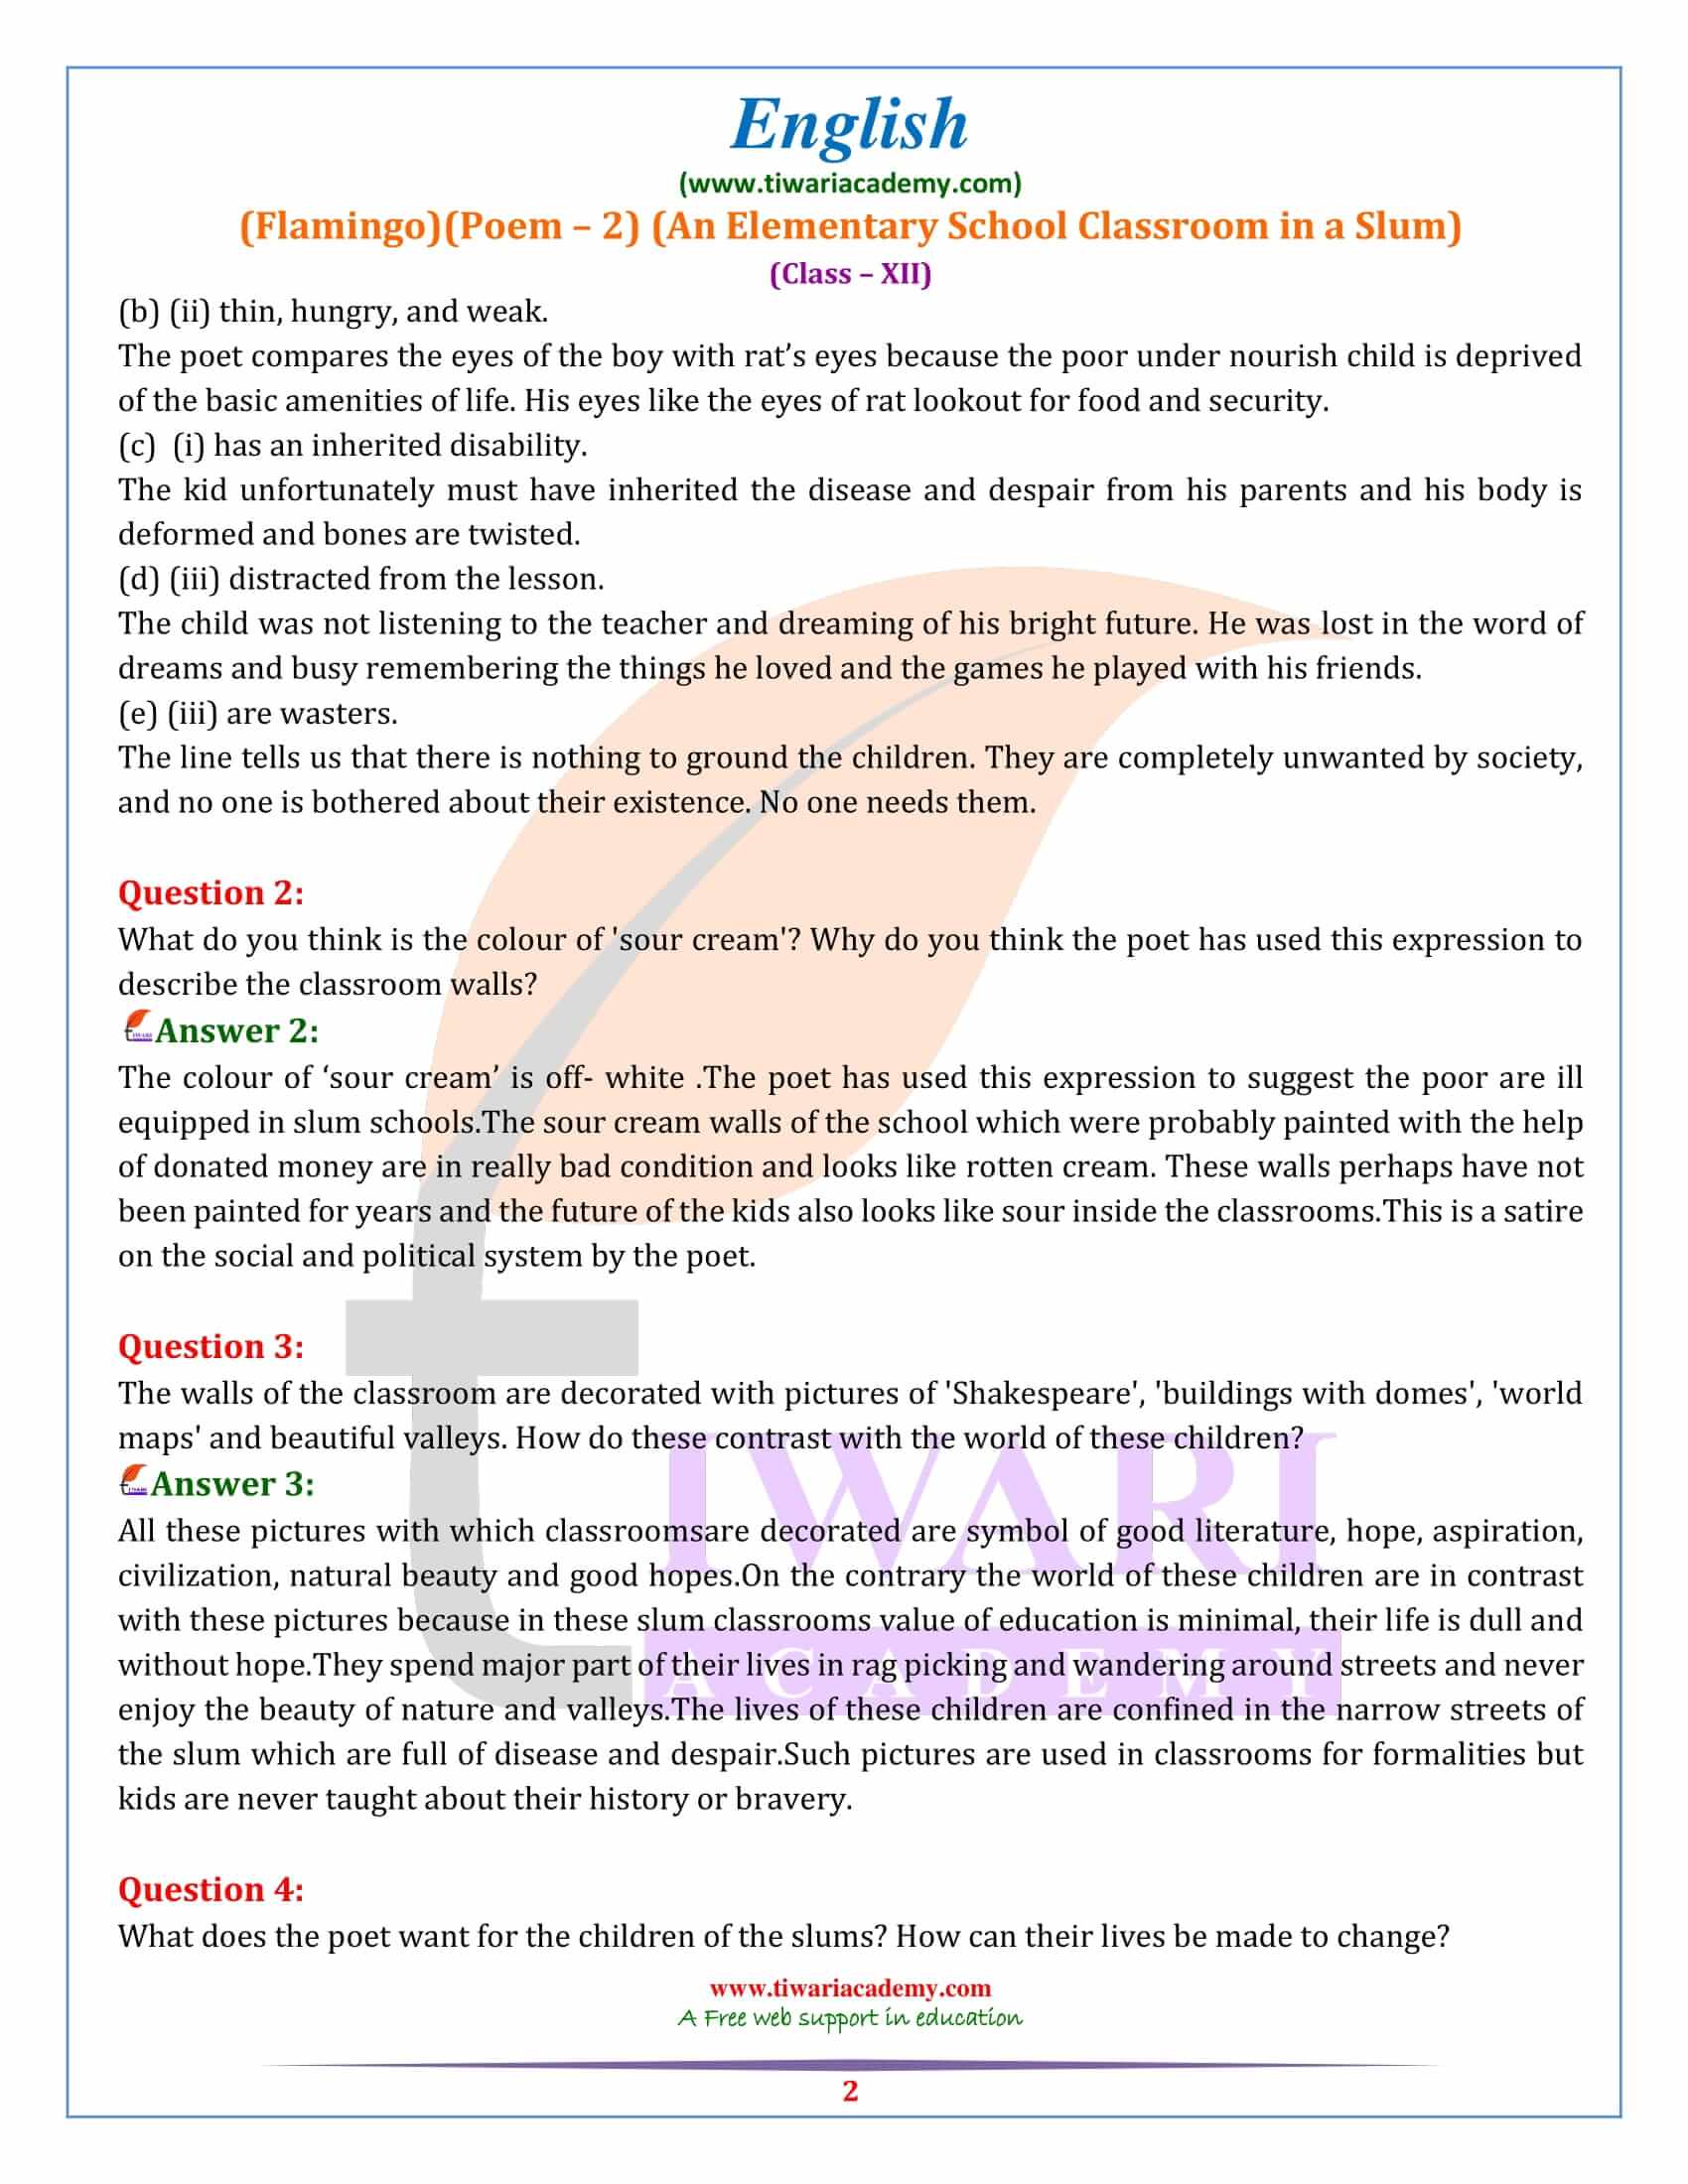 NCERT Solutions for Class 12 English Poem 2